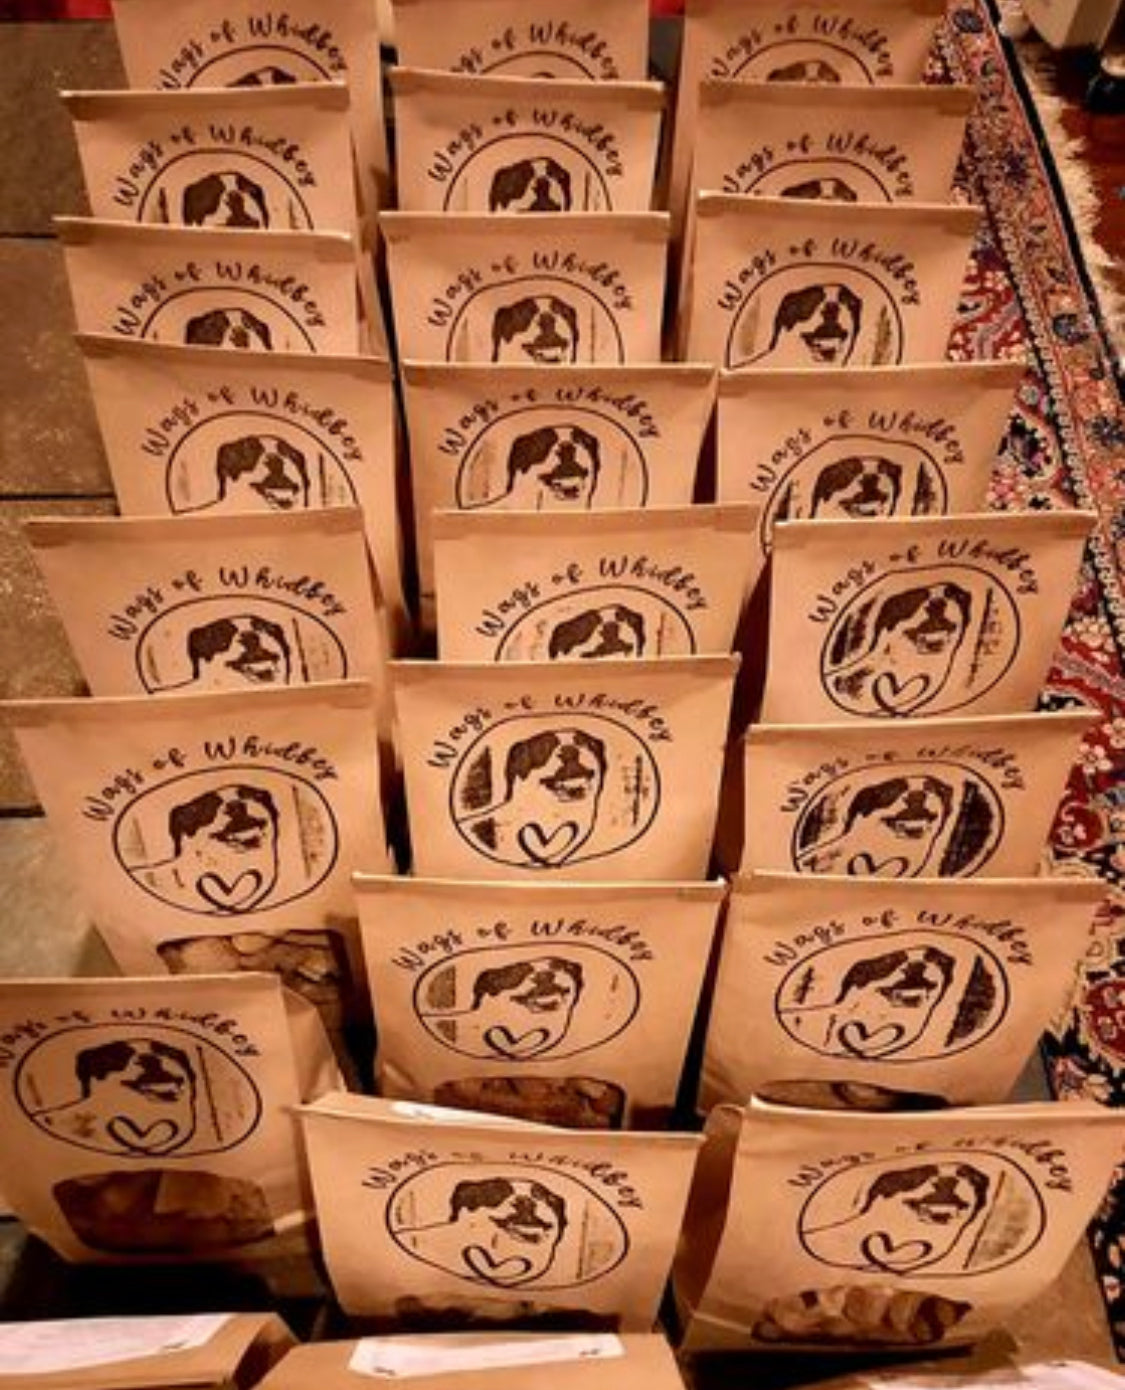 
                  
                    Rows of small paper bags filled with Wags of Whidbey dog treats, on a red paisley carpet
                  
                